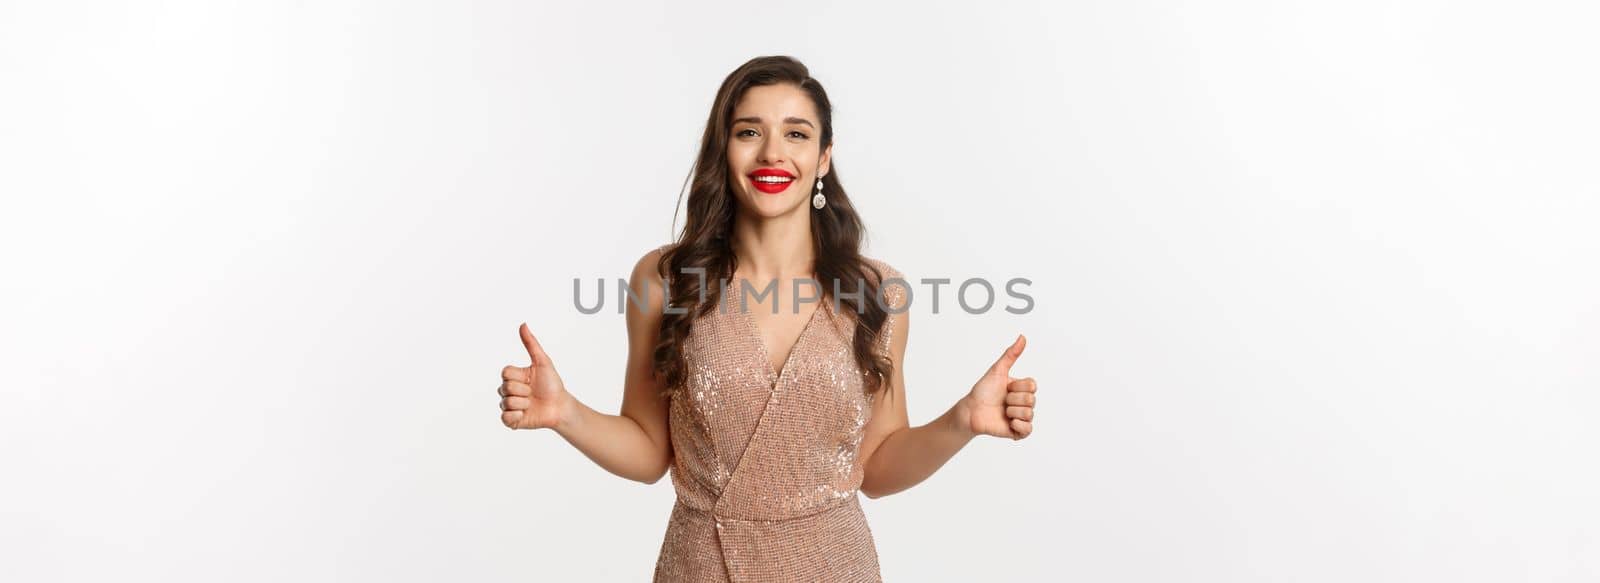 Concept of celebration, holidays and party.Attractive female model in luxurious dress, showing thumbs up and smiling satisfied, approve and like, standing over white background.